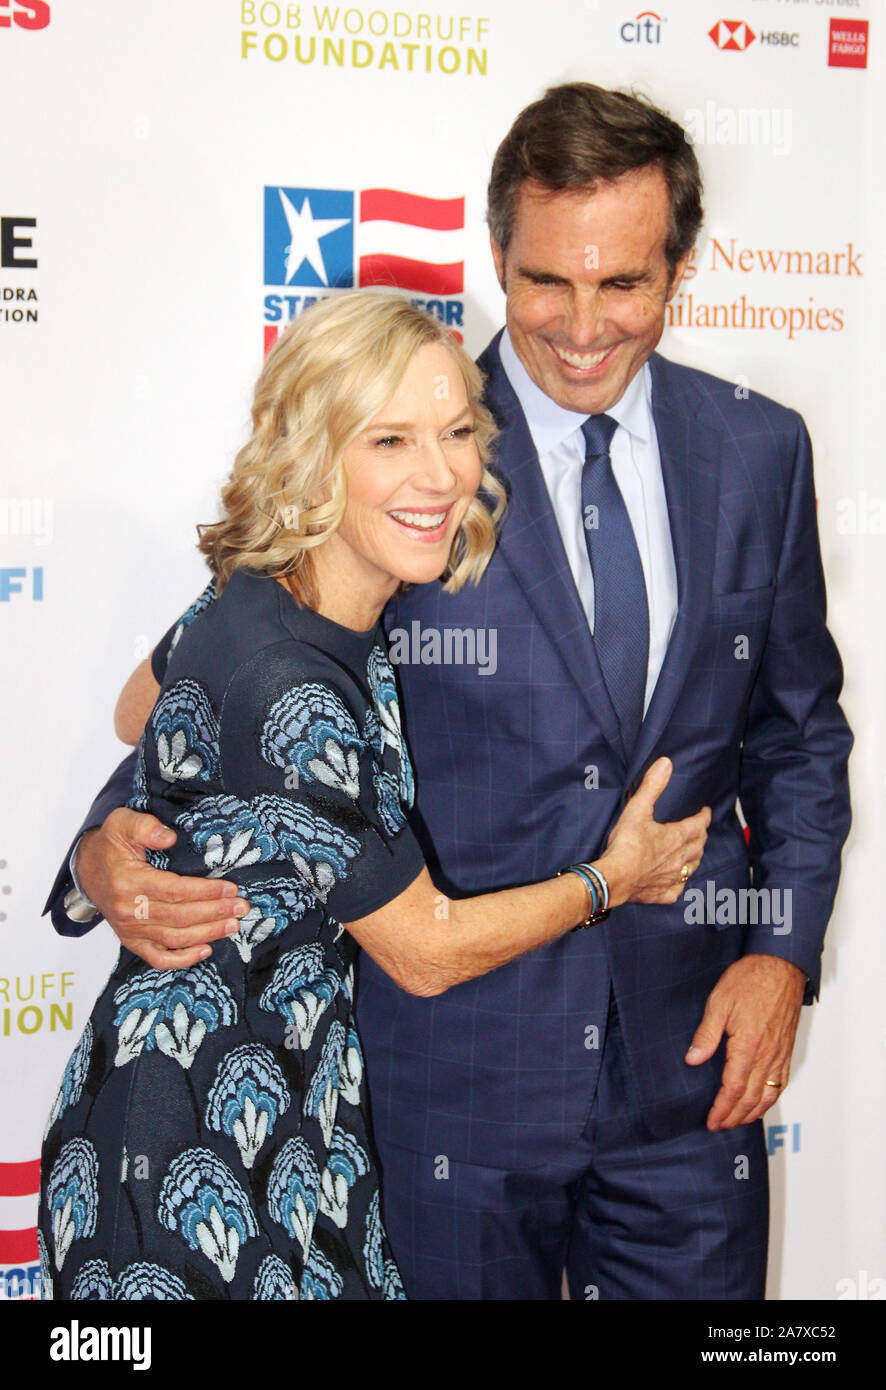 New York, NY, USA. 4th Nov, 2019. Lee Woodruff and Bob Woodruff at 13th  Annual Stand Up For Heroes during the 2019 New York Comedy Festival at Hulu  Theater at Madison Square